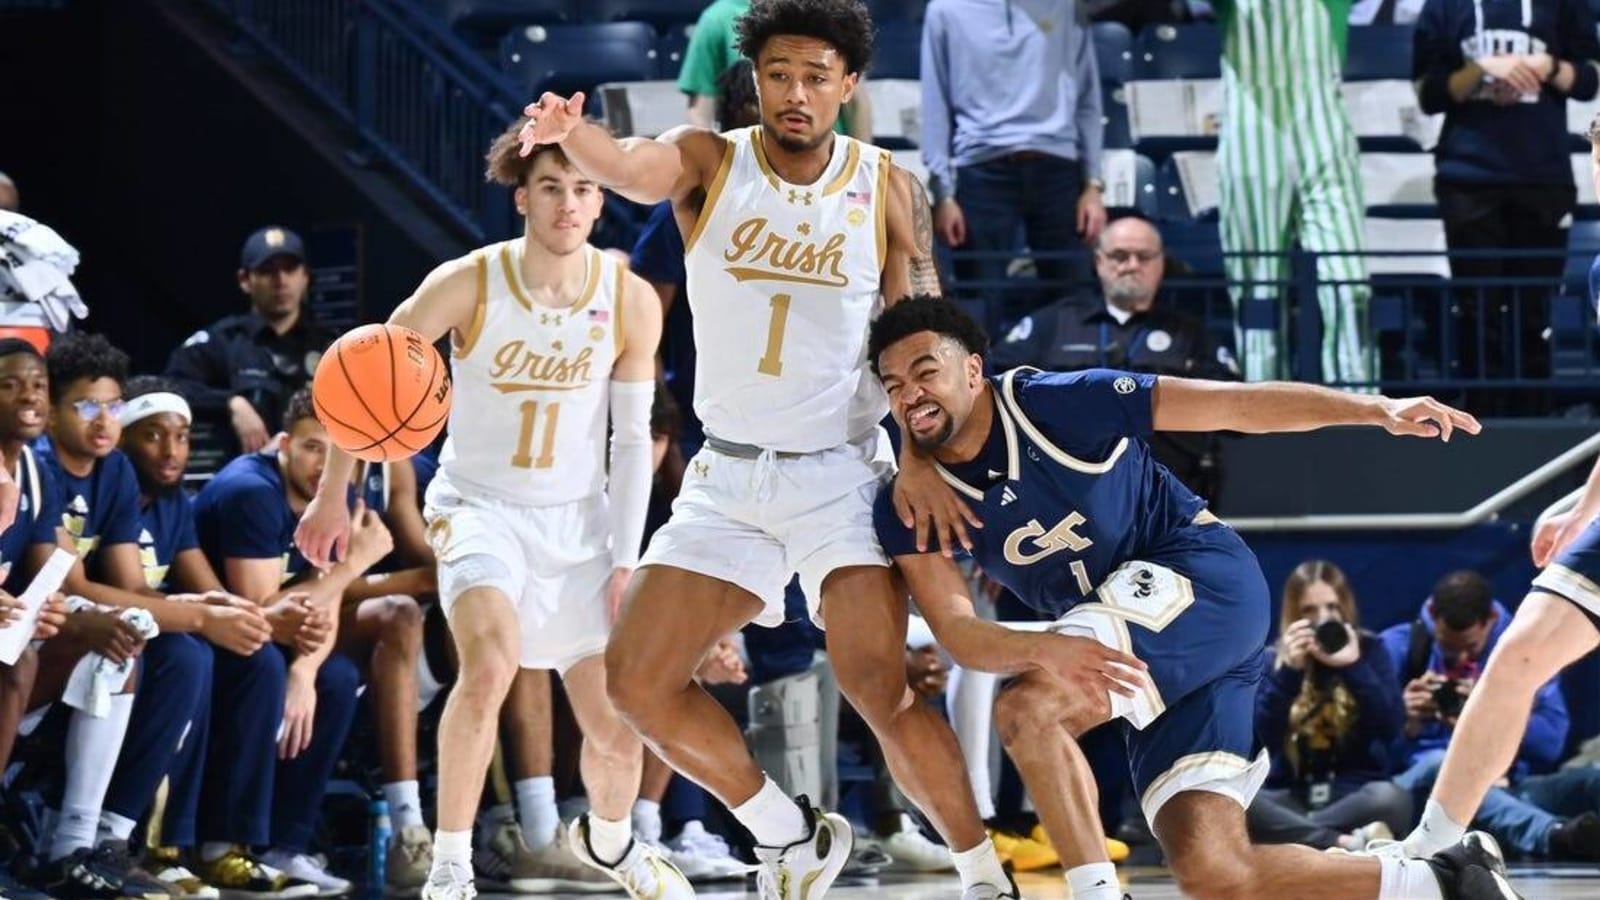 Notre Dame ekes out victory over Georgia Tech